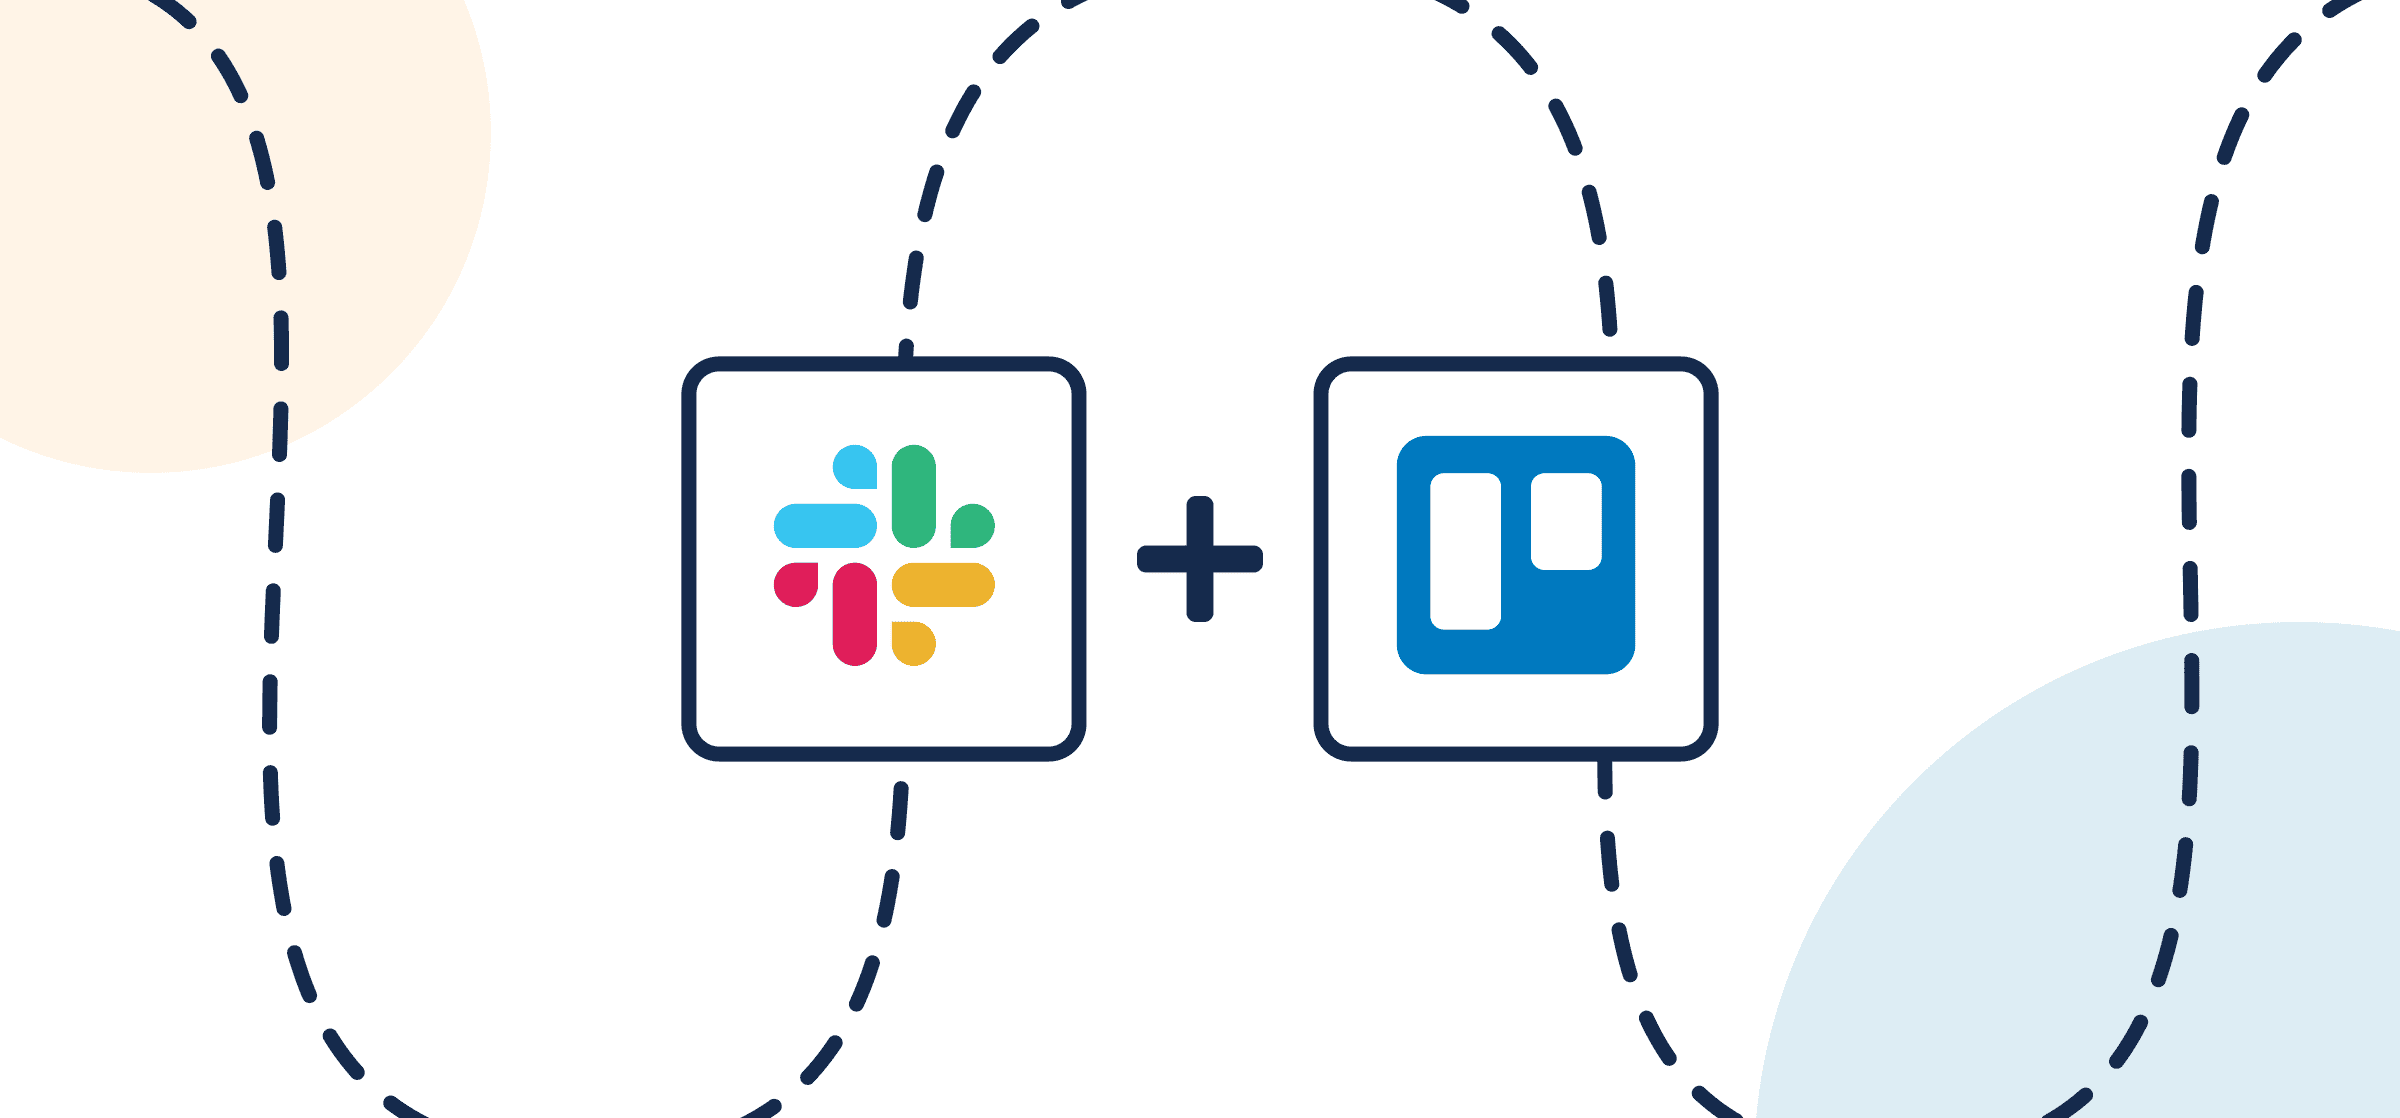 Featured image illustrating a step-by-step guide on syncing Slack to Trello through Unito, depicted by the connected logos through circles and dotted lines.